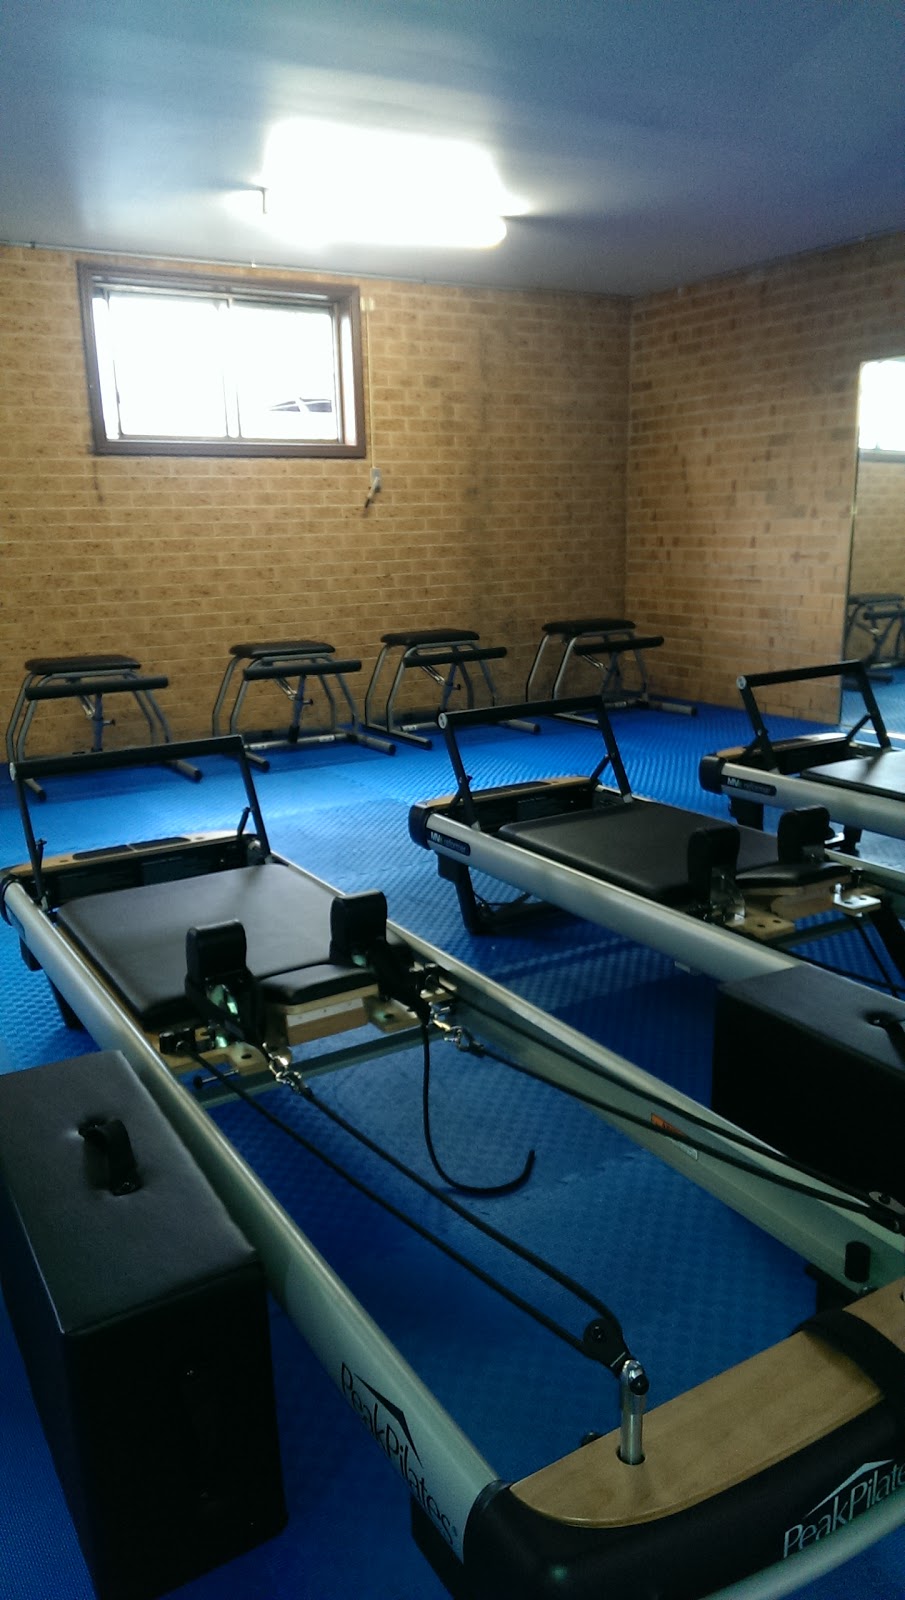 Amore Pilates | gym | 121 Pascoe Vale Rd, Moonee Ponds VIC 3039, Australia | 0437339447 OR +61 437 339 447